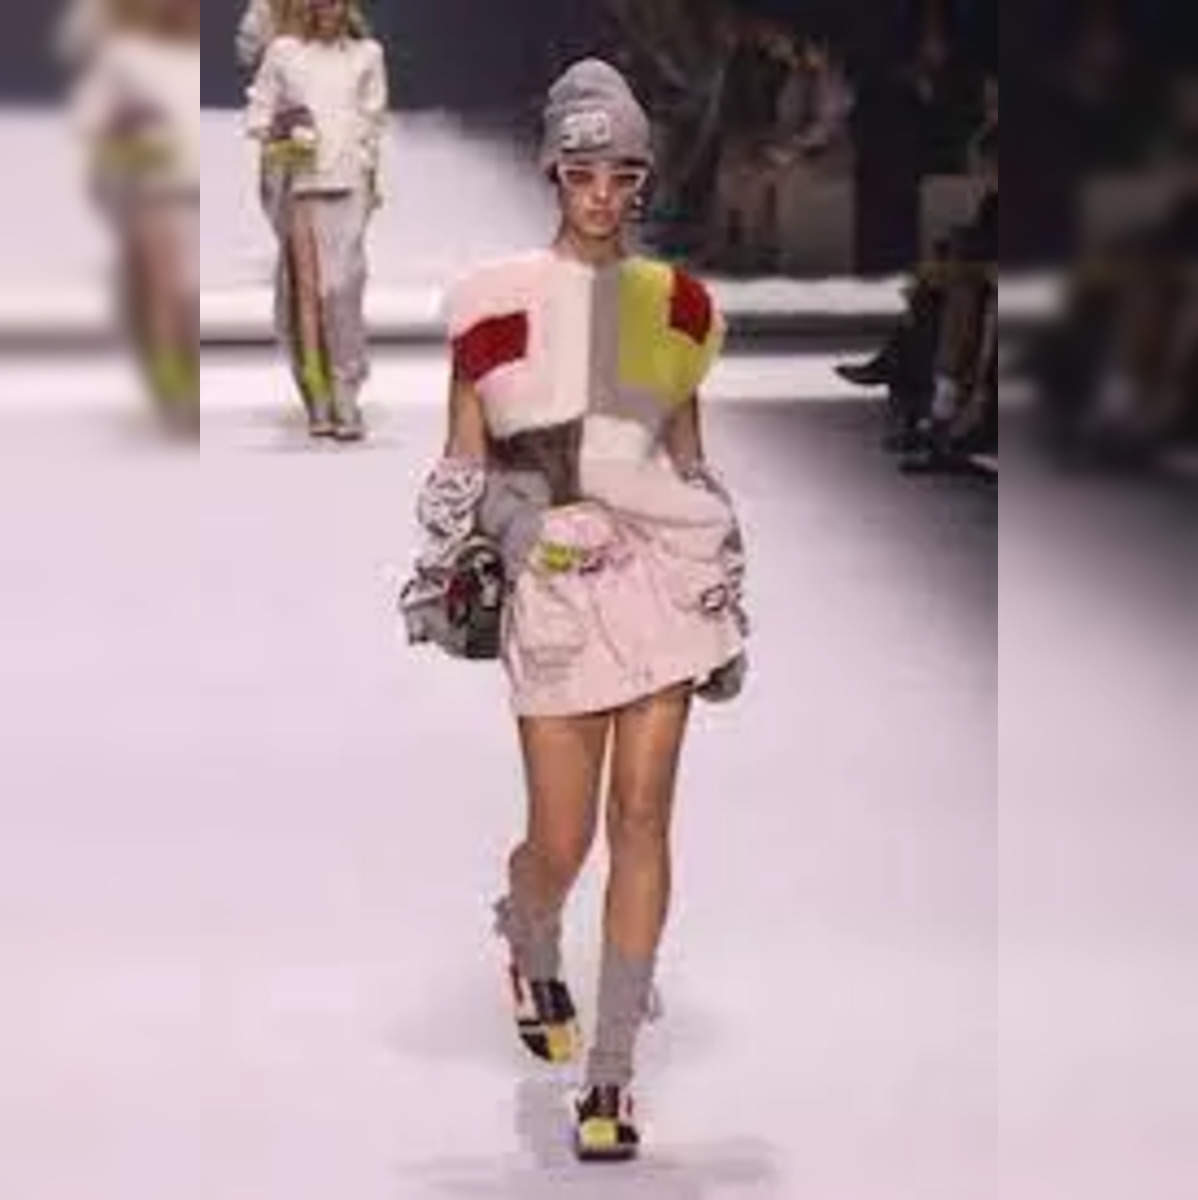 fendi: New York Fashion Week 2022: Fendi's Baguette bag takes center stage  at a special runway show - The Economic Times